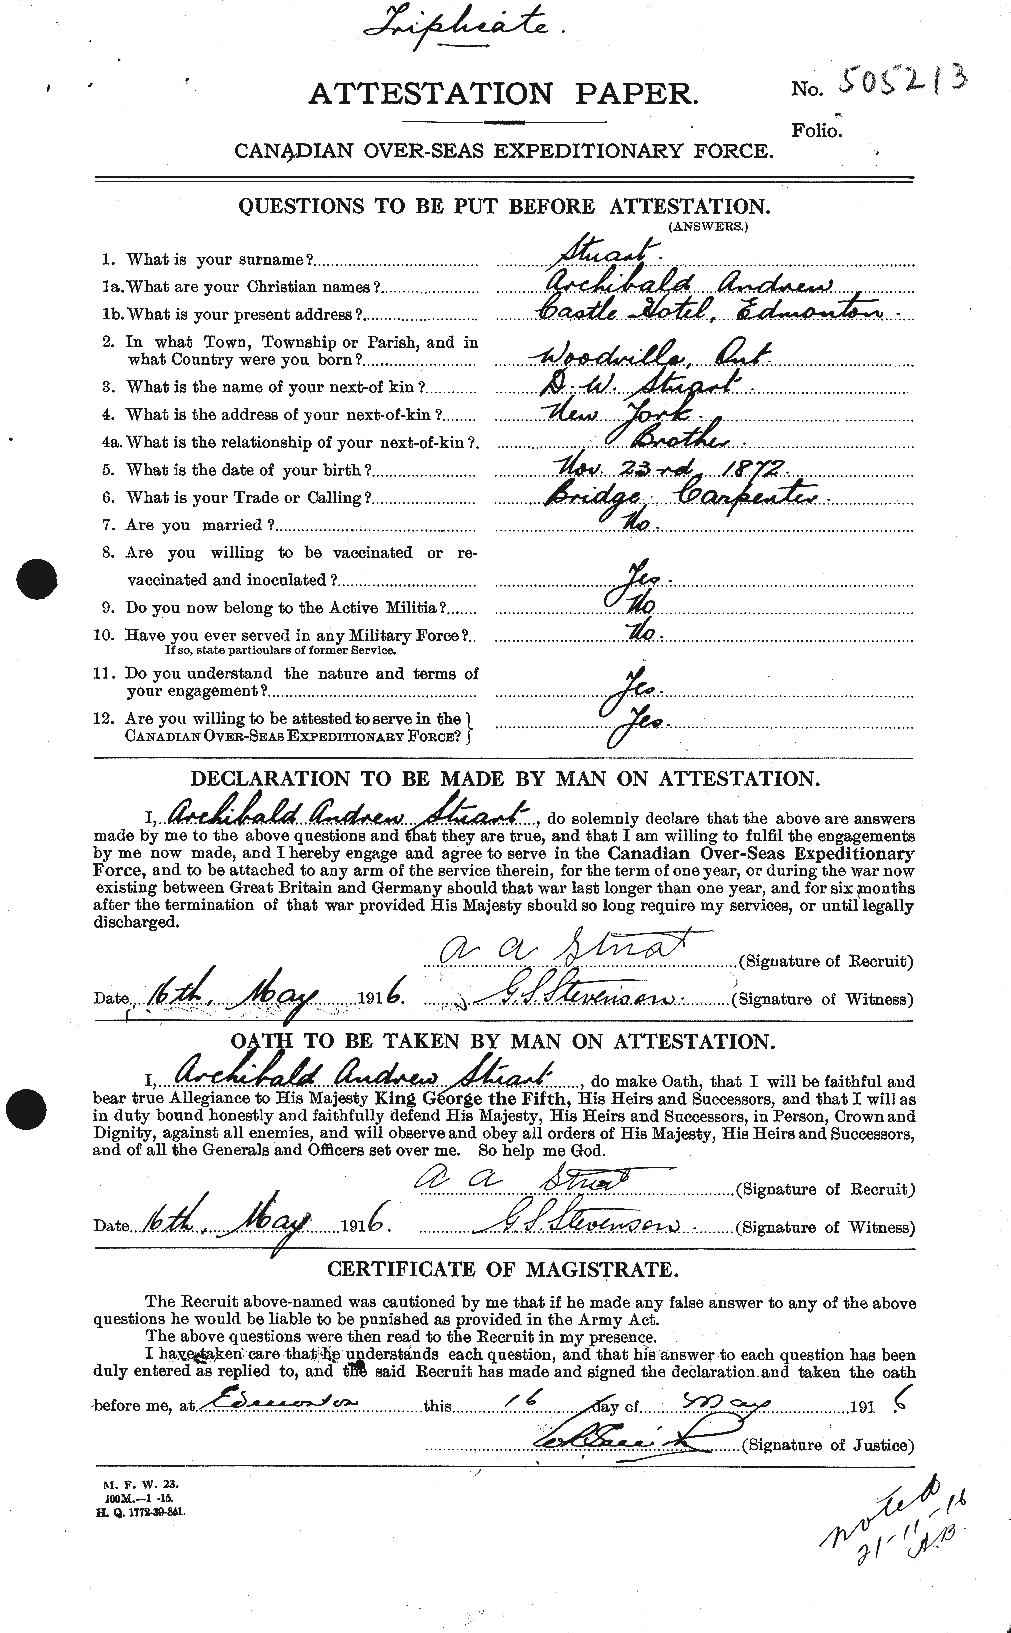 Personnel Records of the First World War - CEF 122316a